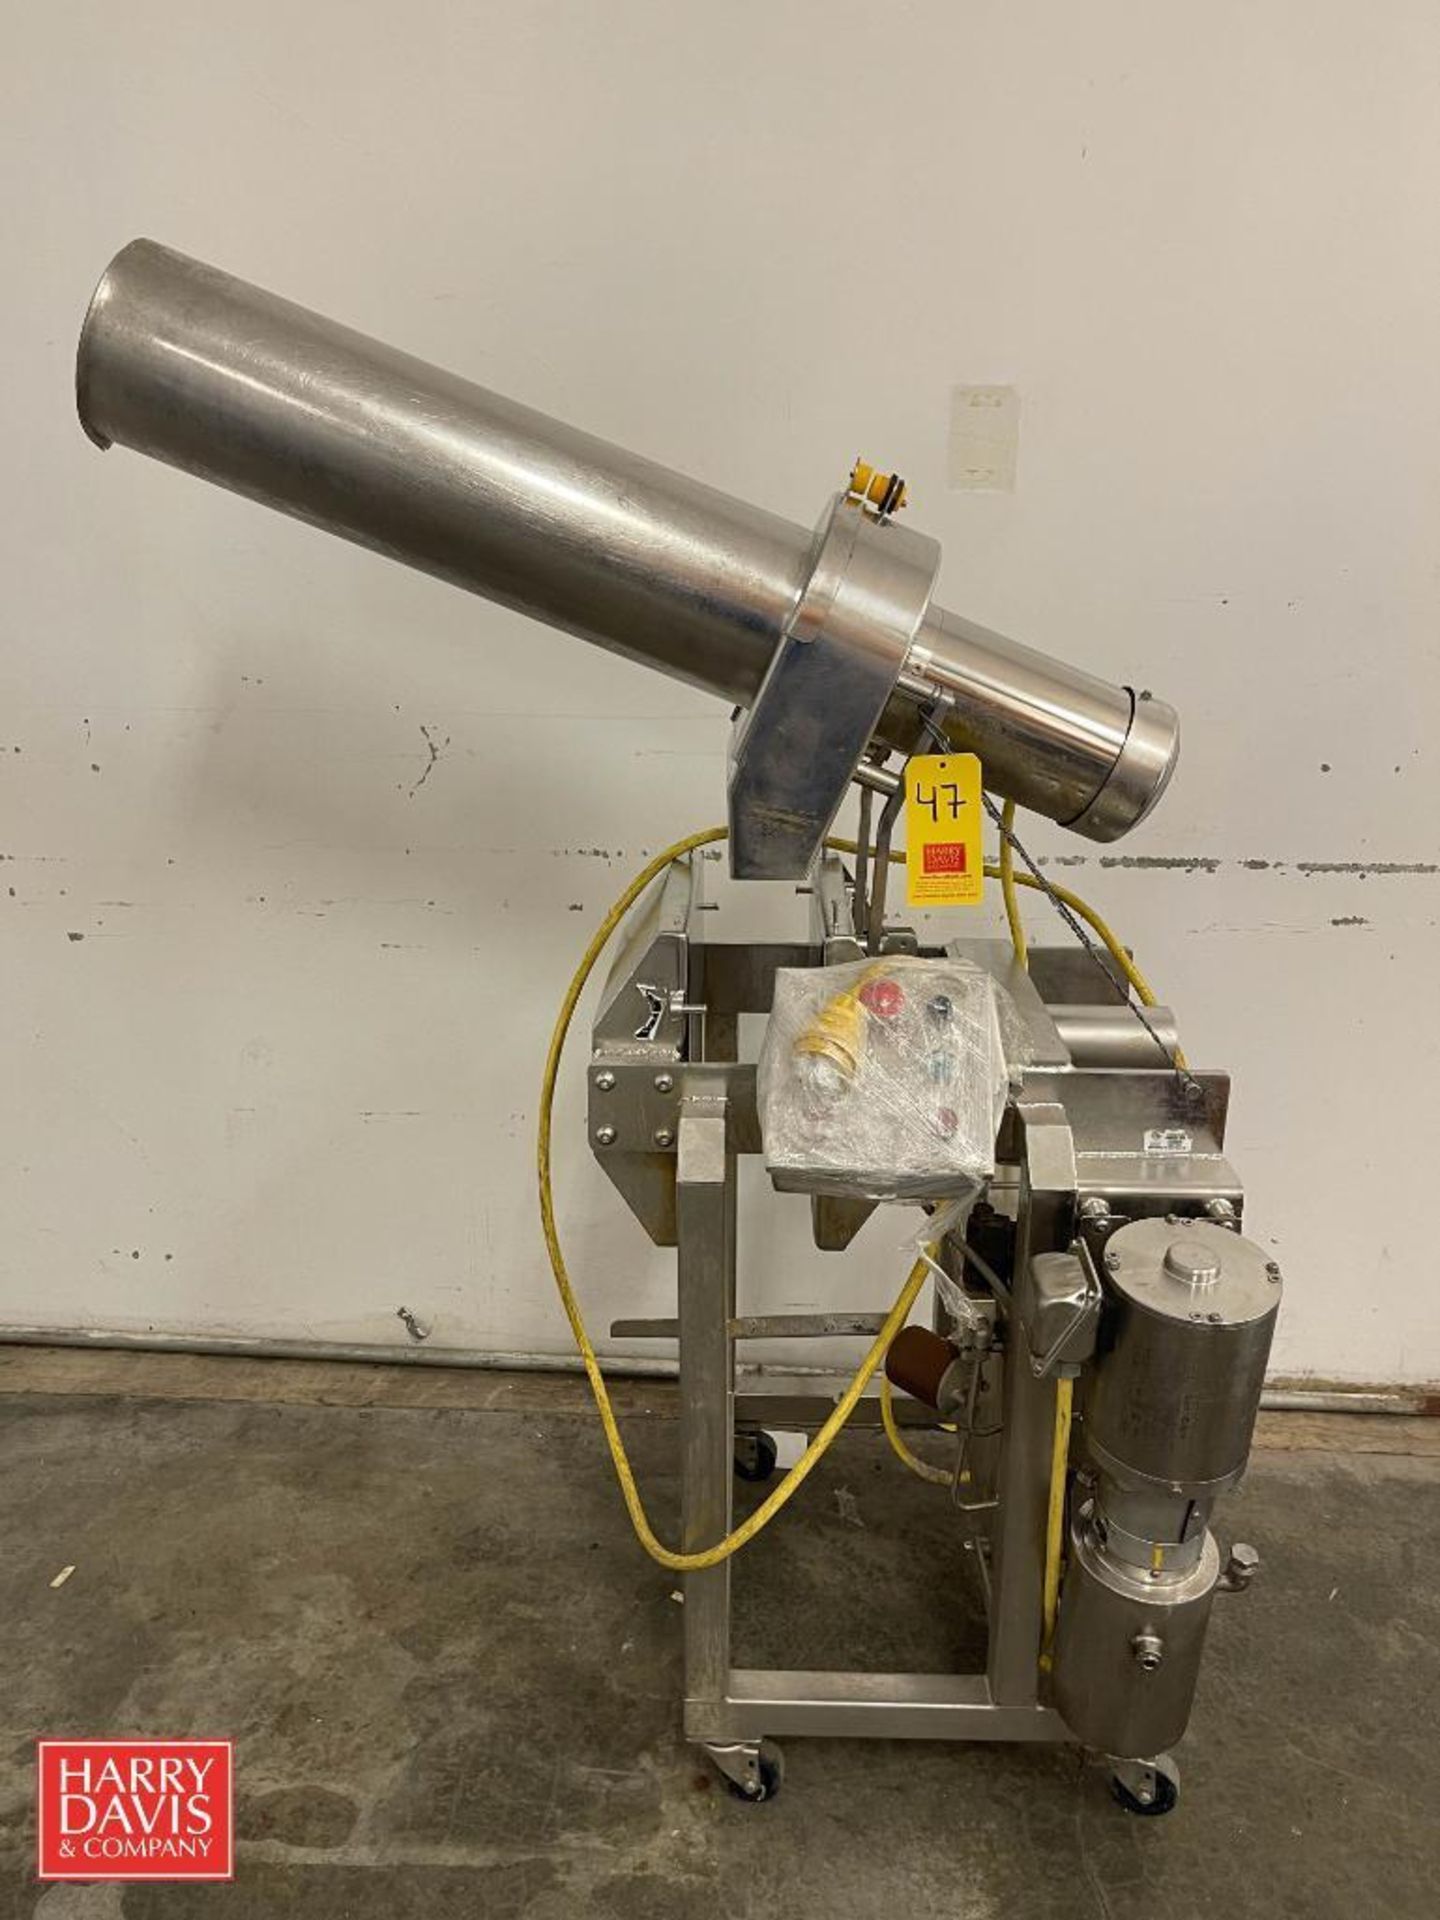 Juiced Rite Juicer, Model: 75, S/N: 7259 with ABB Controls - Rigging Fee: $250